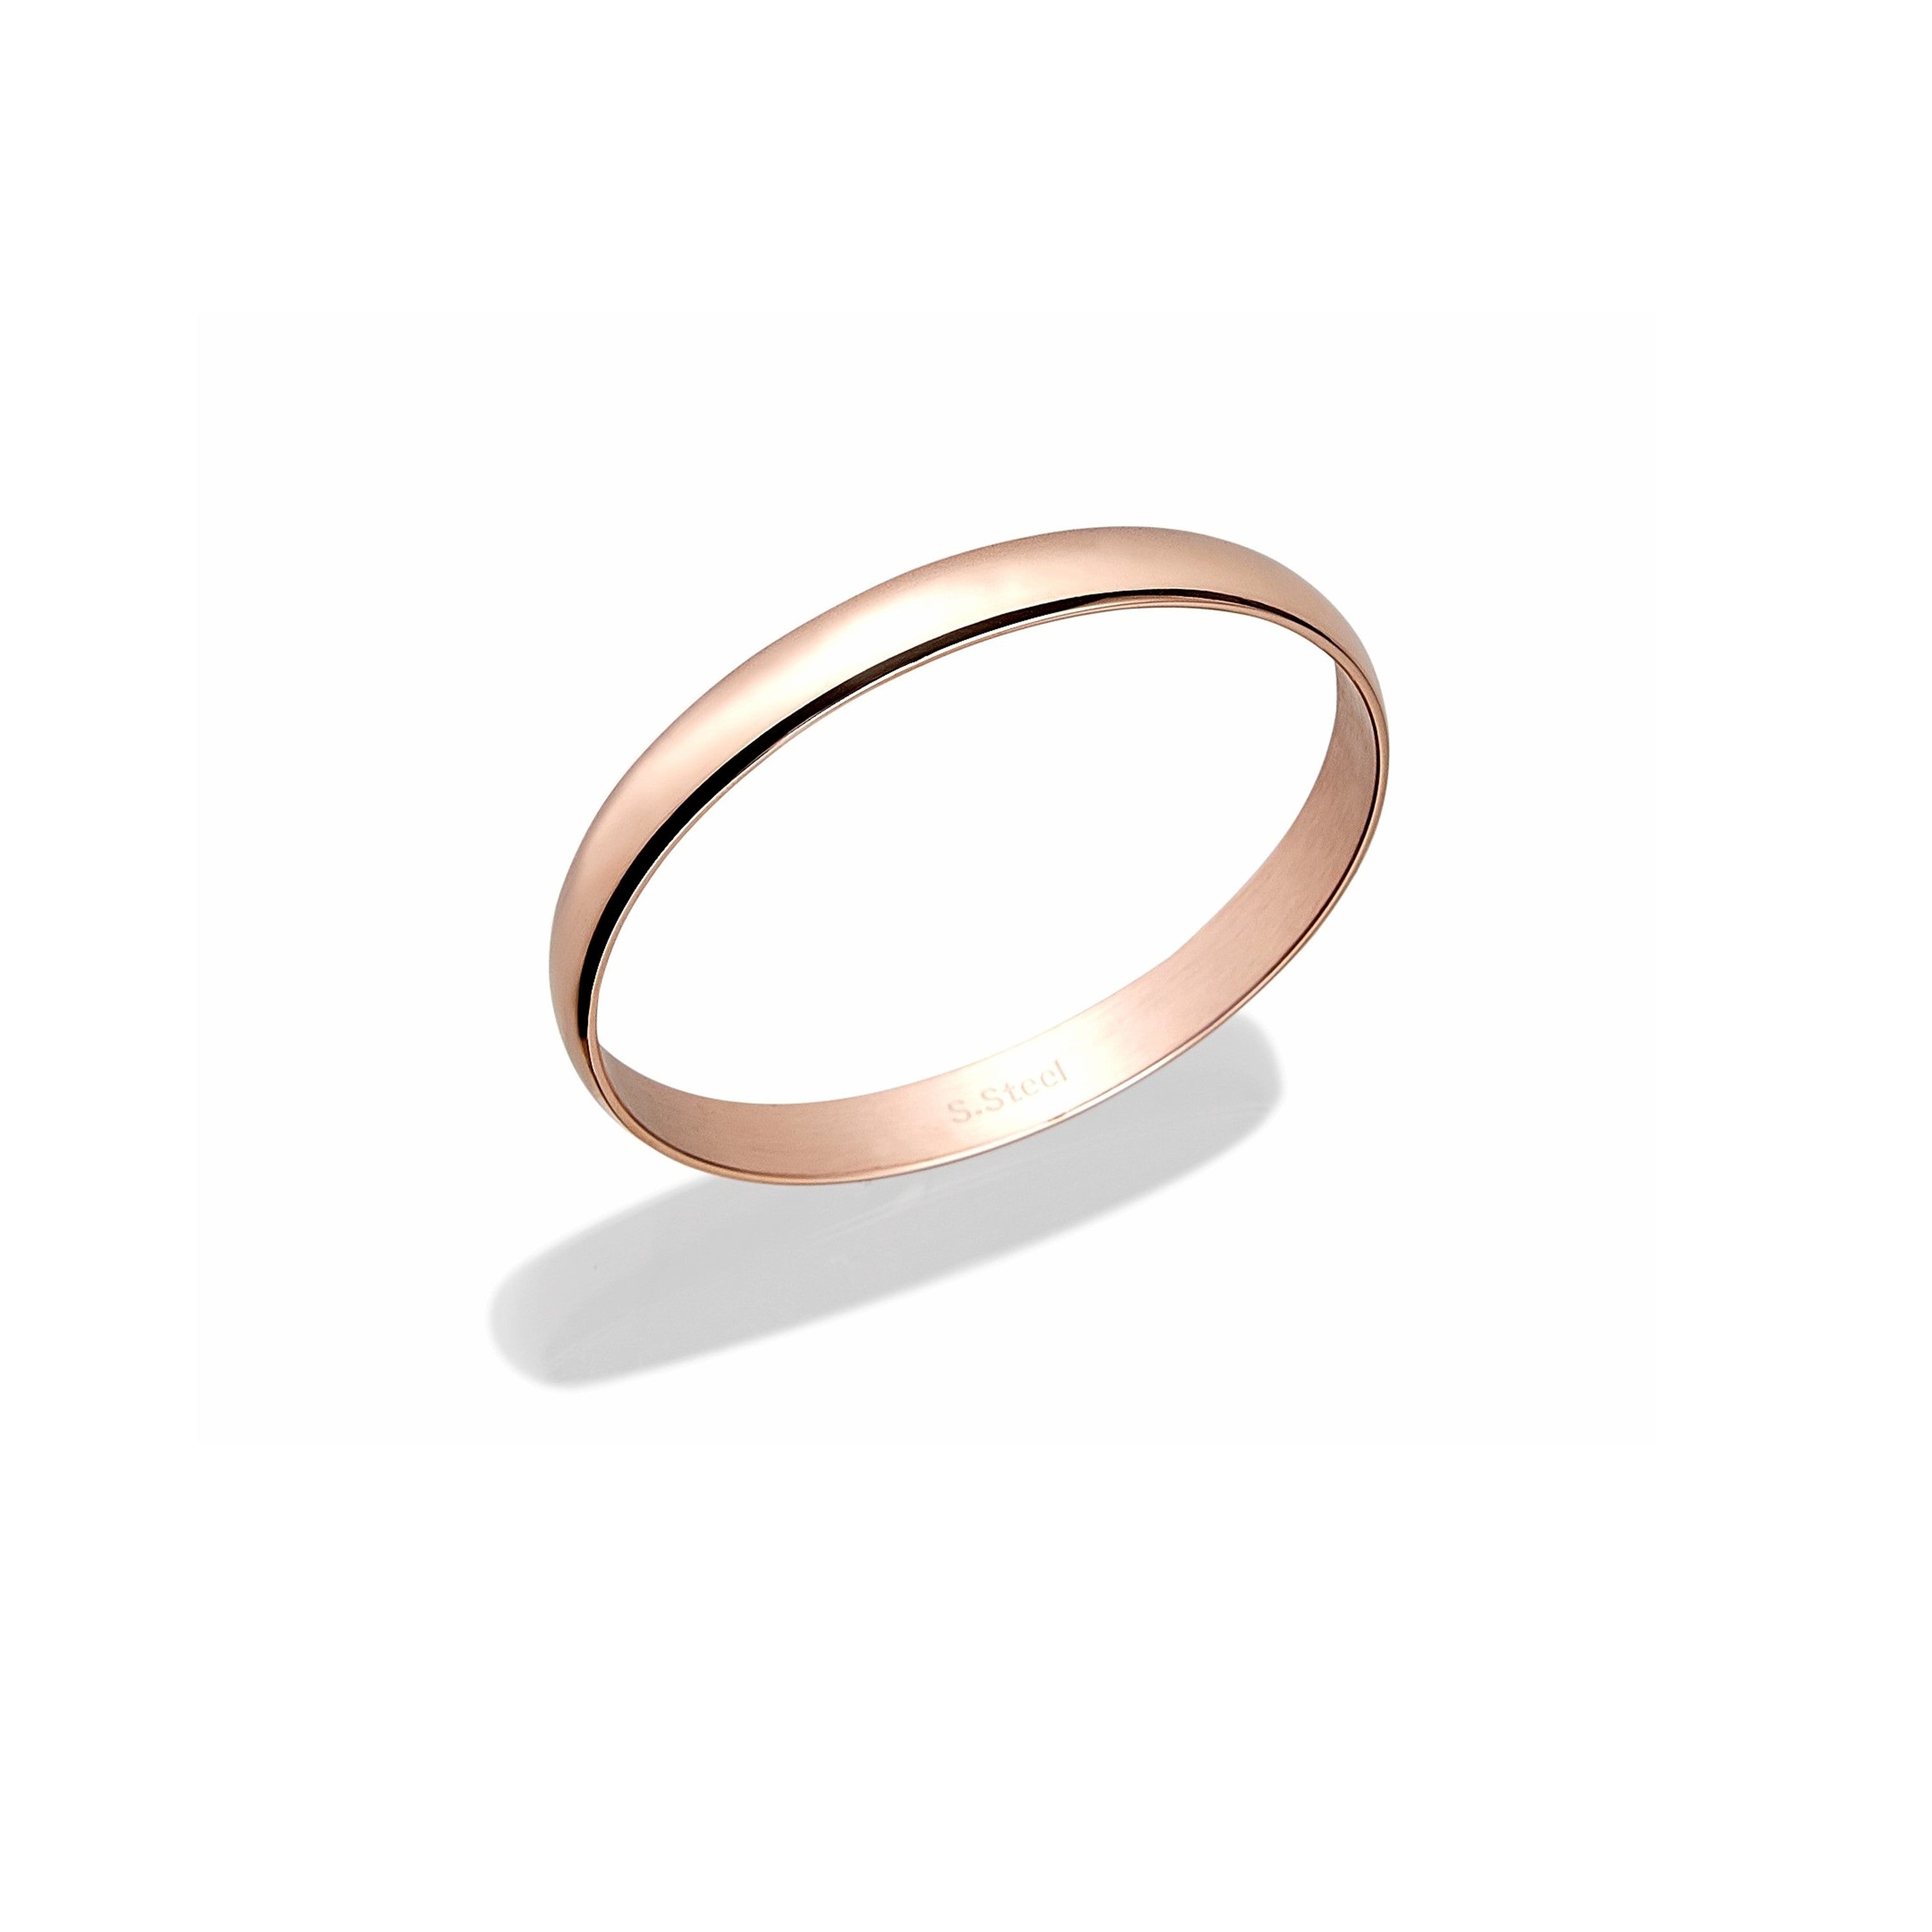 Stainless Steel 8mm Rose Gold Tone Bangle